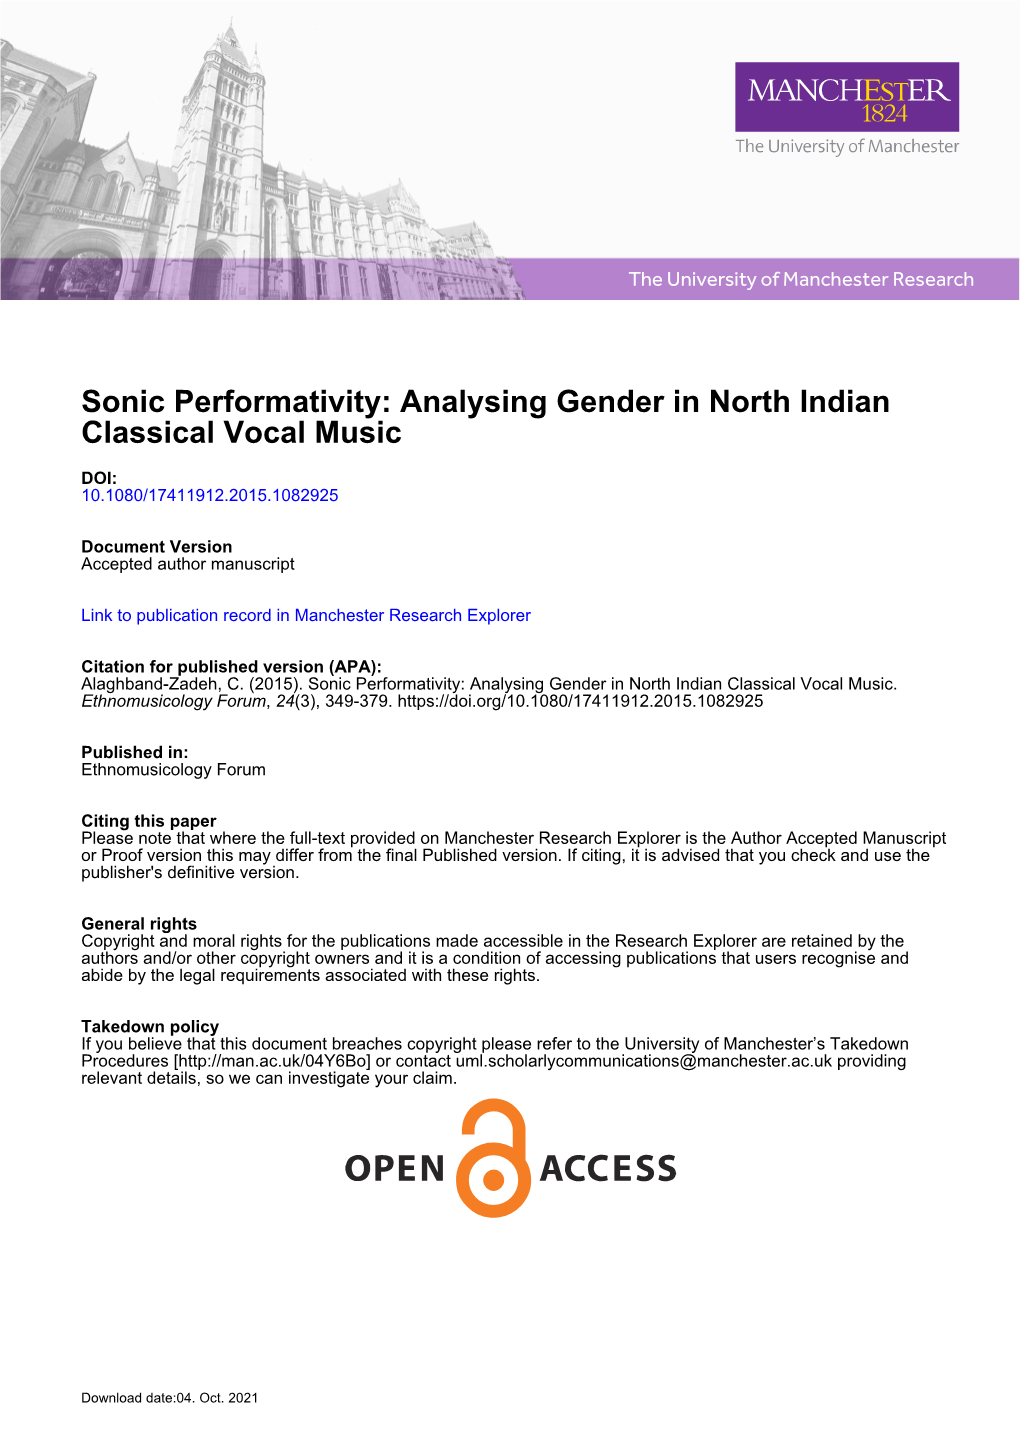 Sonic Performativity: Analysing Gender in North Indian Classical Vocal Music